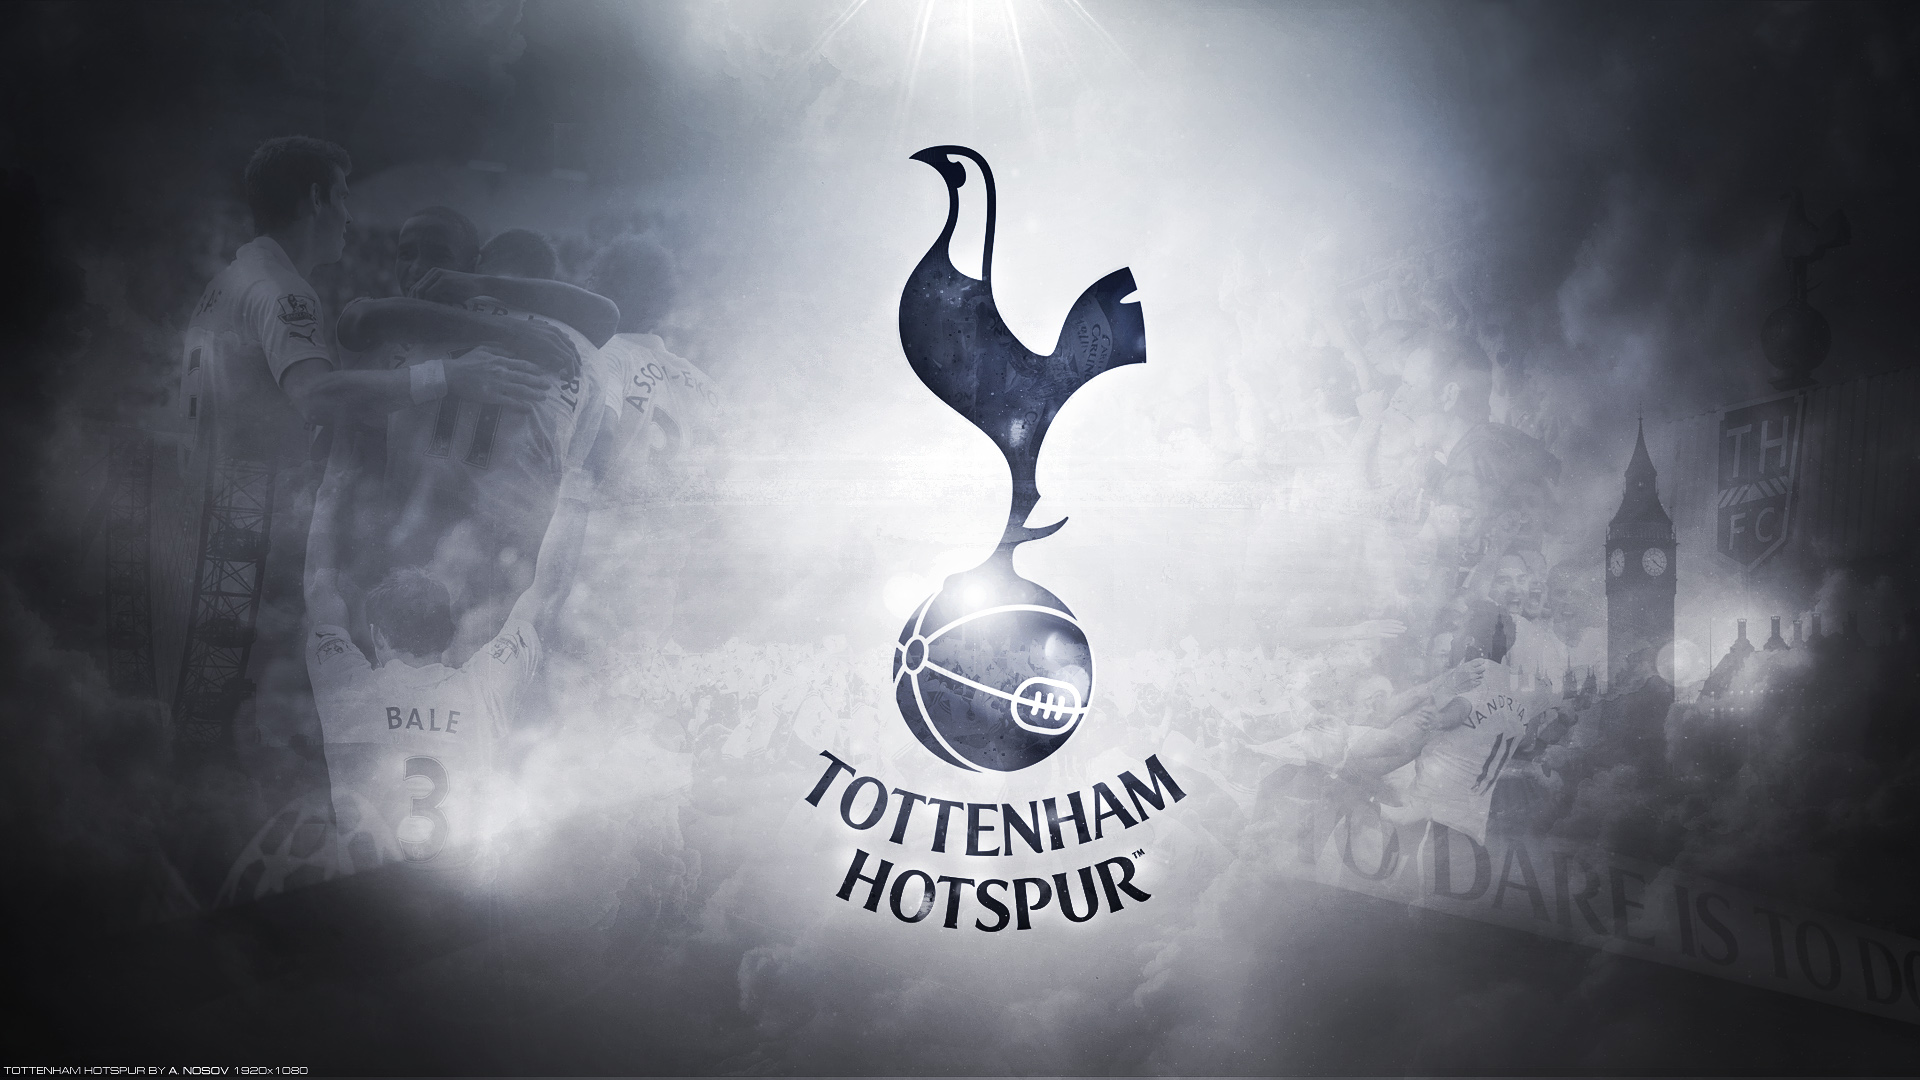 Journalist claims Spurs are ‘playing the long game’ but he expects transfer to happen